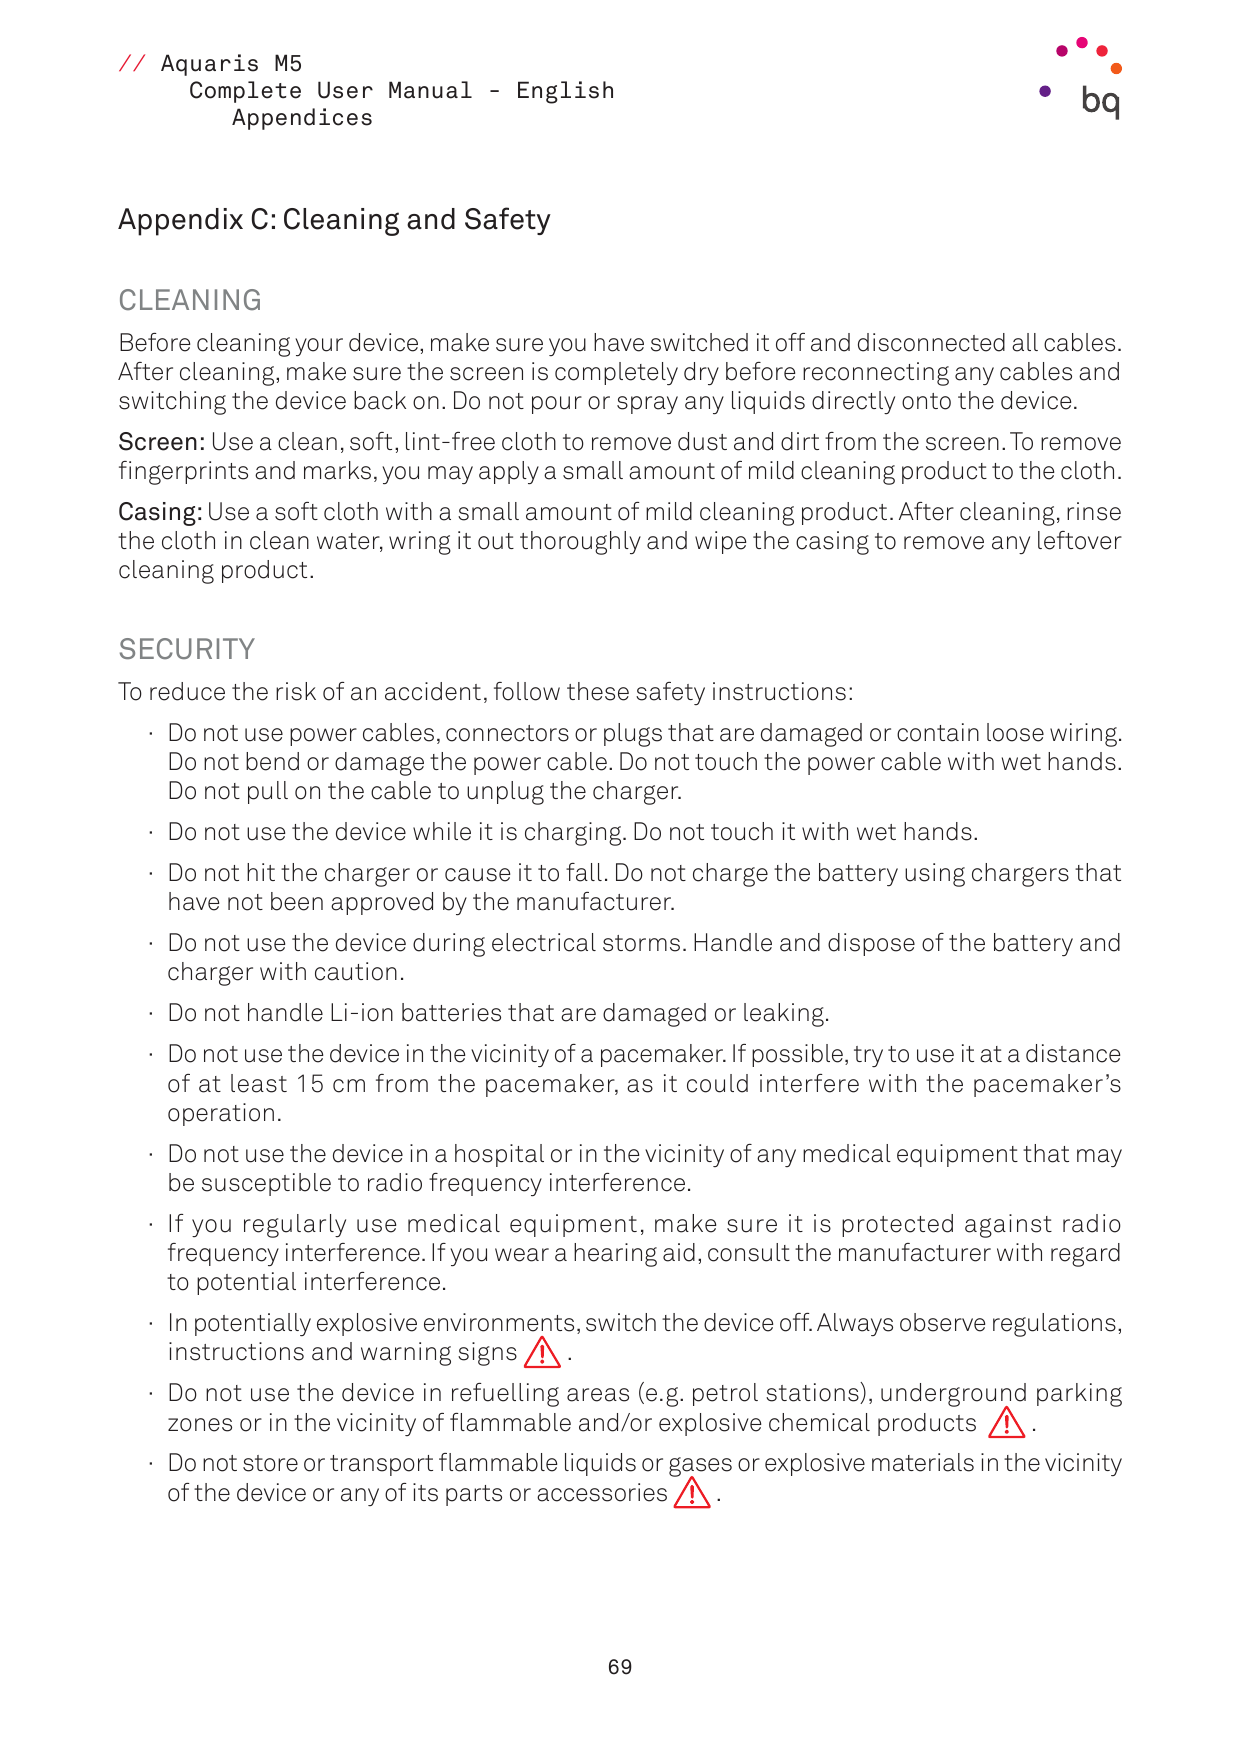 // Aquaris M5Complete User Manual - EnglishAppendicesAppendix C: Cleaning and SafetyCLEANINGBefore cleaning your device, make su